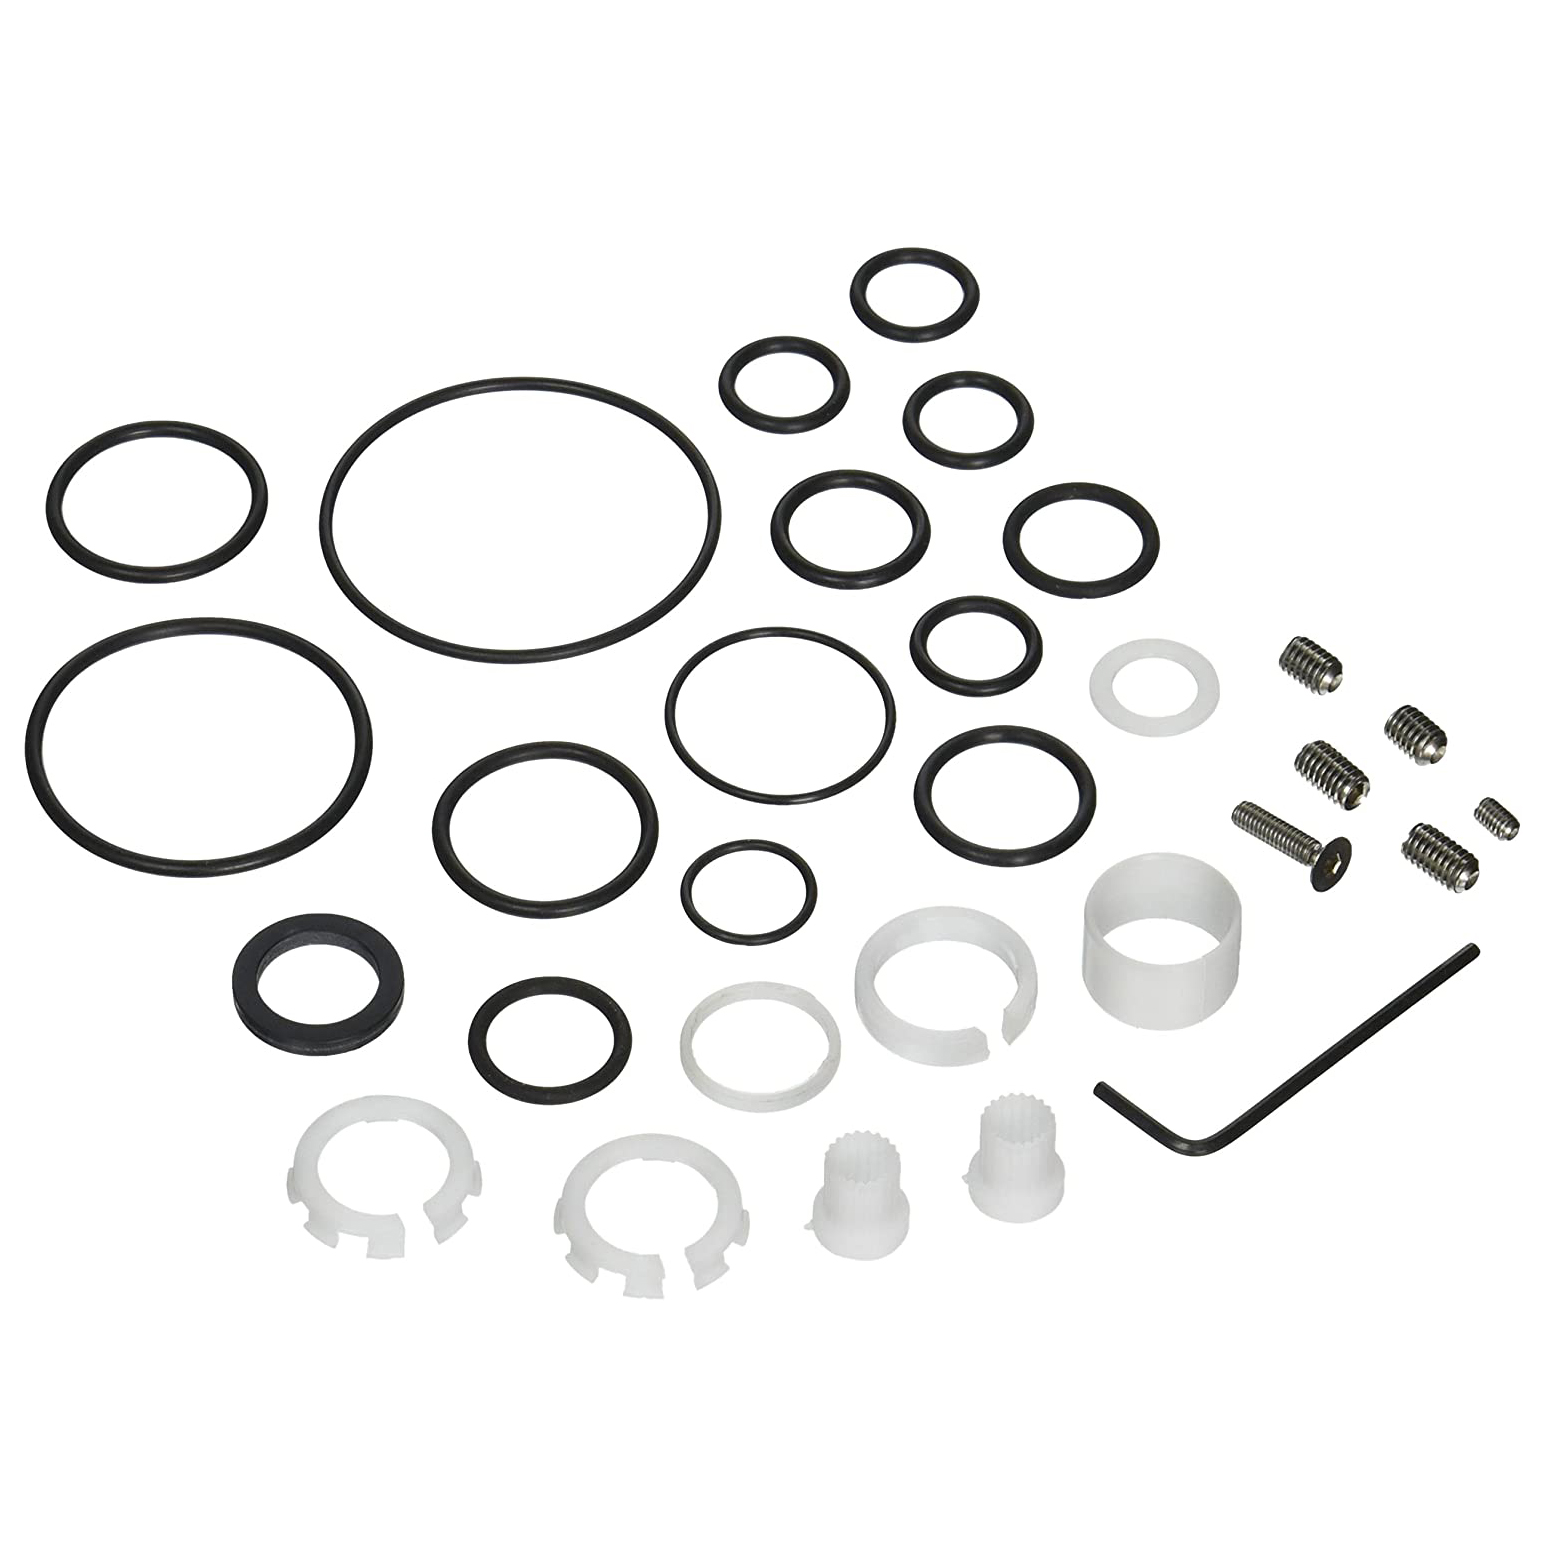 Perrin & Rowe Kitchen Seal Kit for Swing Arm Pot Fillers